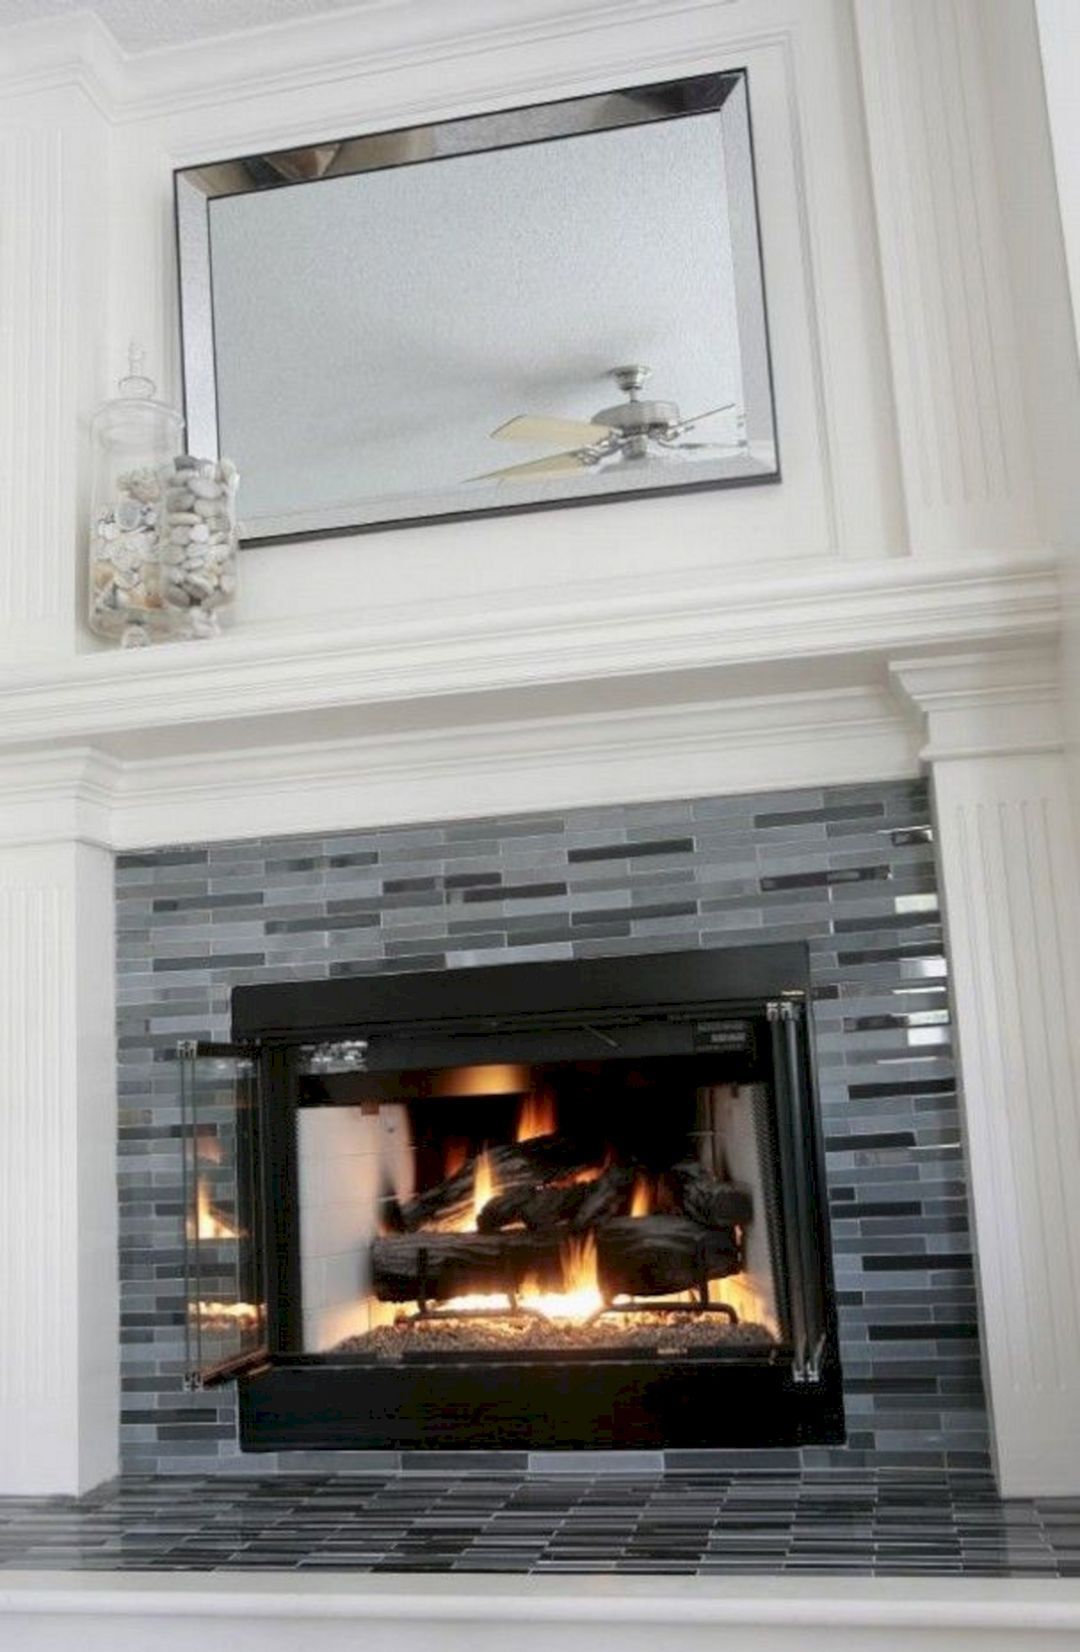 Fireplace Door Cover Best Of 22 Wonderful Fireplace Tile Design for Amazing Home